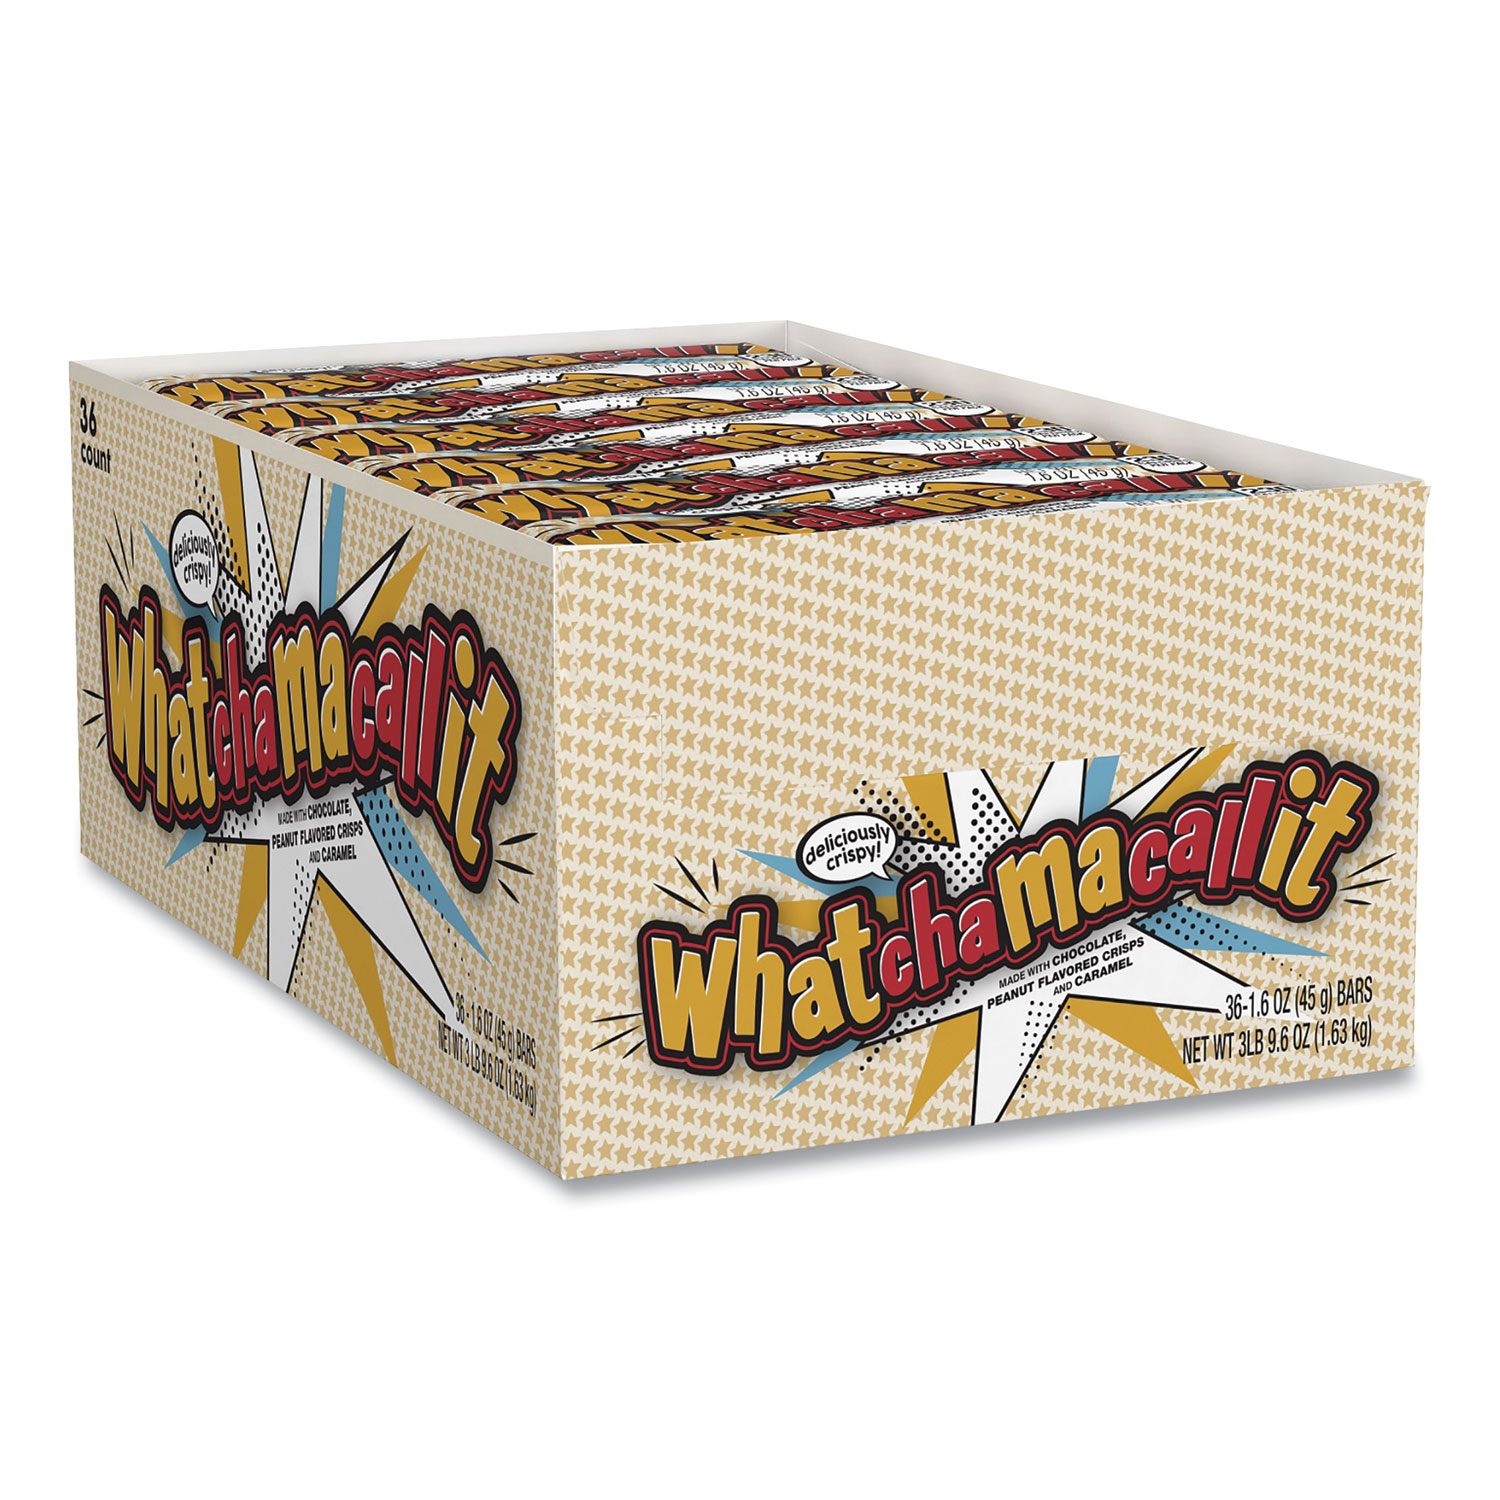  WHATCHAMACALLIT 24700 Candy Bar, 1.6 oz Bar, 36 Bars/Box, Free Delivery in 1-4 Business Days (GRR24600188) 